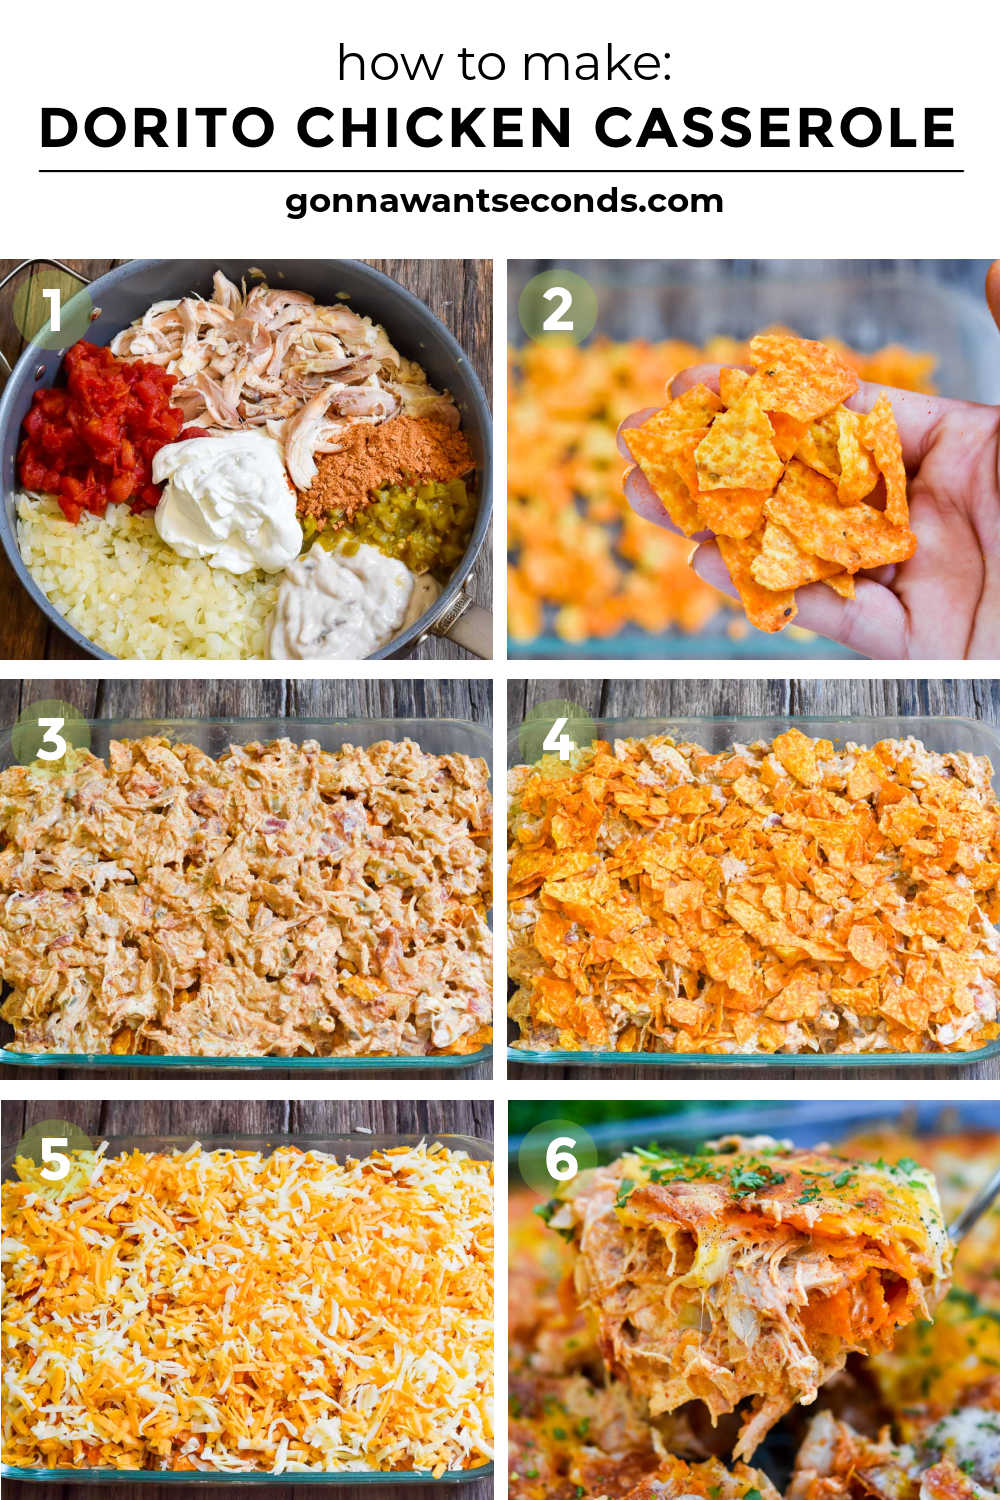 Step by step how to make Dorito Chicken Casserole